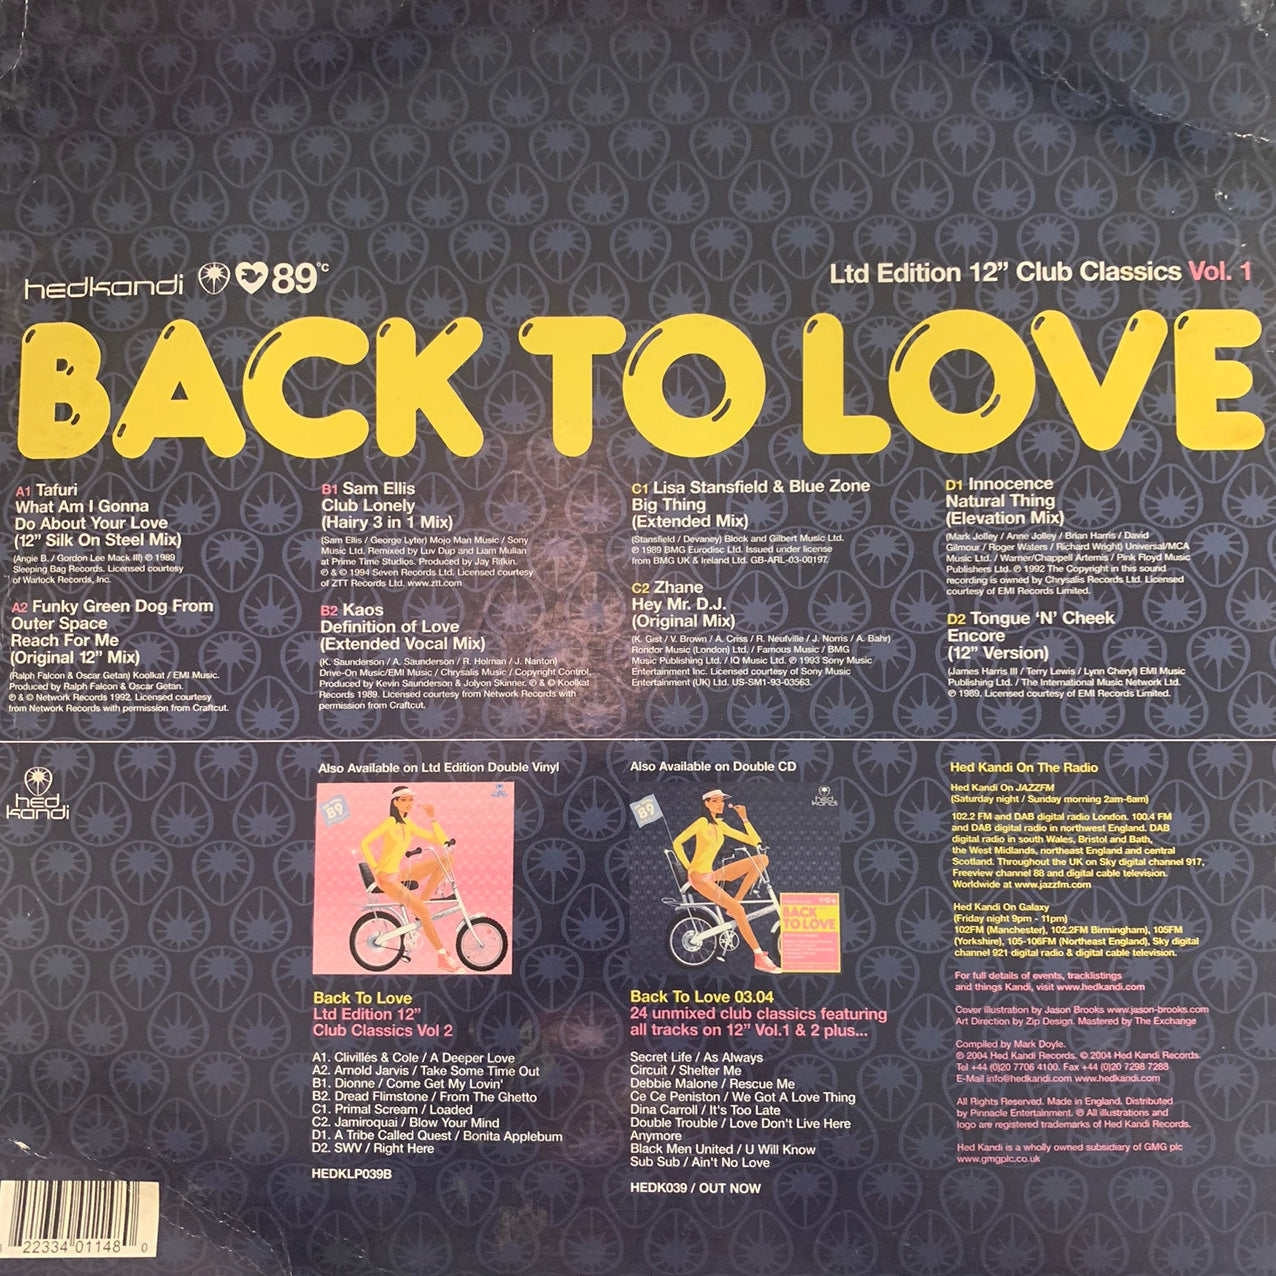 Hedkandi ‘Back To Love 03.04' 2 x 12inch double pack 8 Track Vinyl